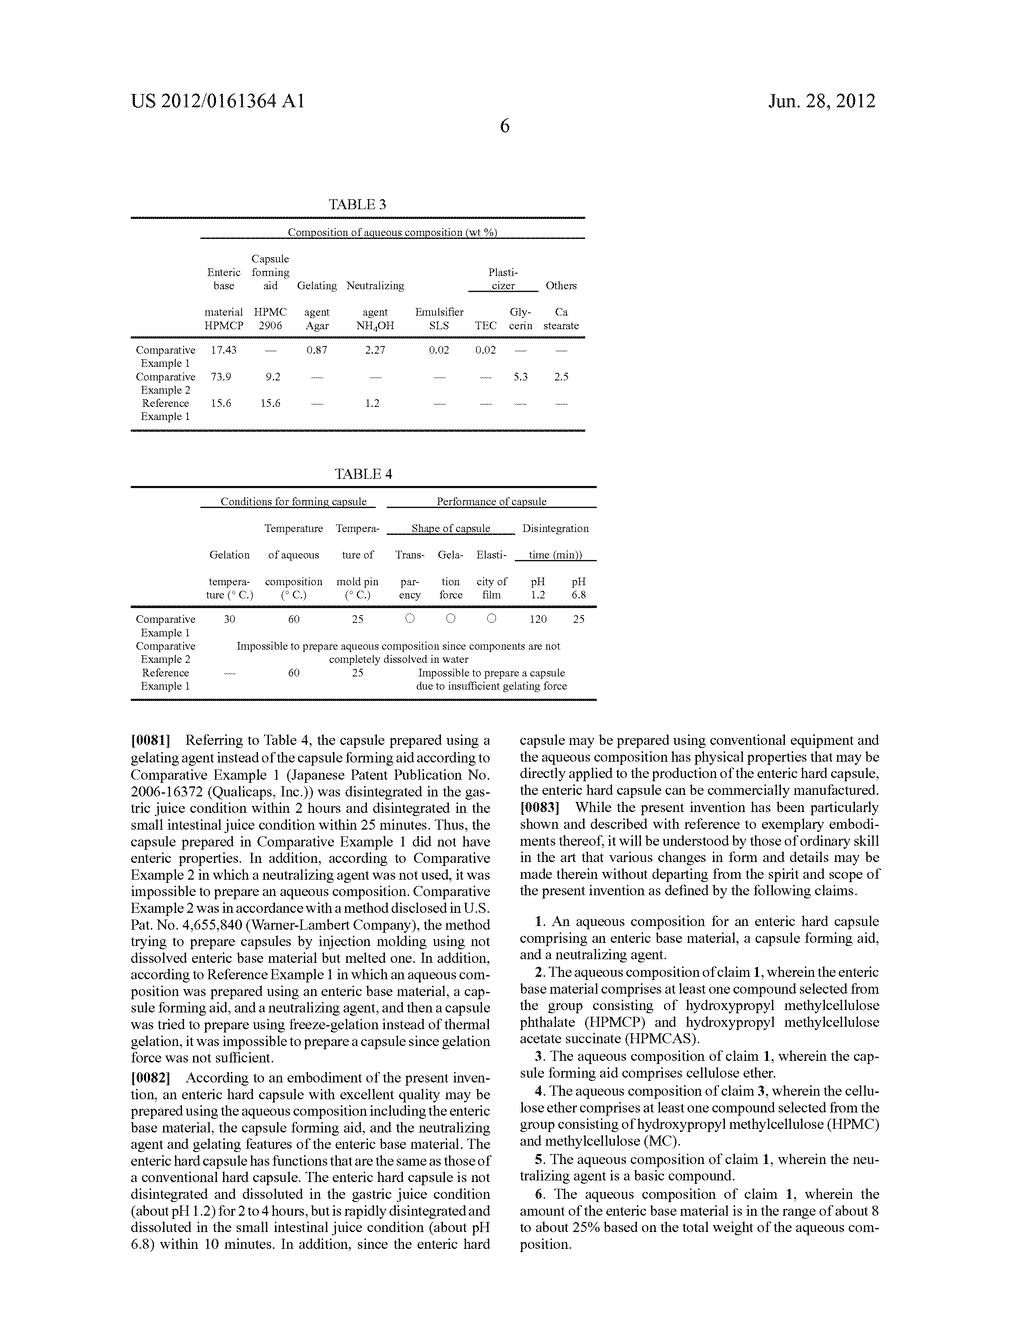 AQUEOUS COMPOSITION FOR ENTERIC HARD CAPSULE, METHOD OF PREPARING ENTERIC     HARD CAPSULE, AND ENTERIC HARD CAPSULE PREPARED USING THE METHOD - diagram, schematic, and image 07